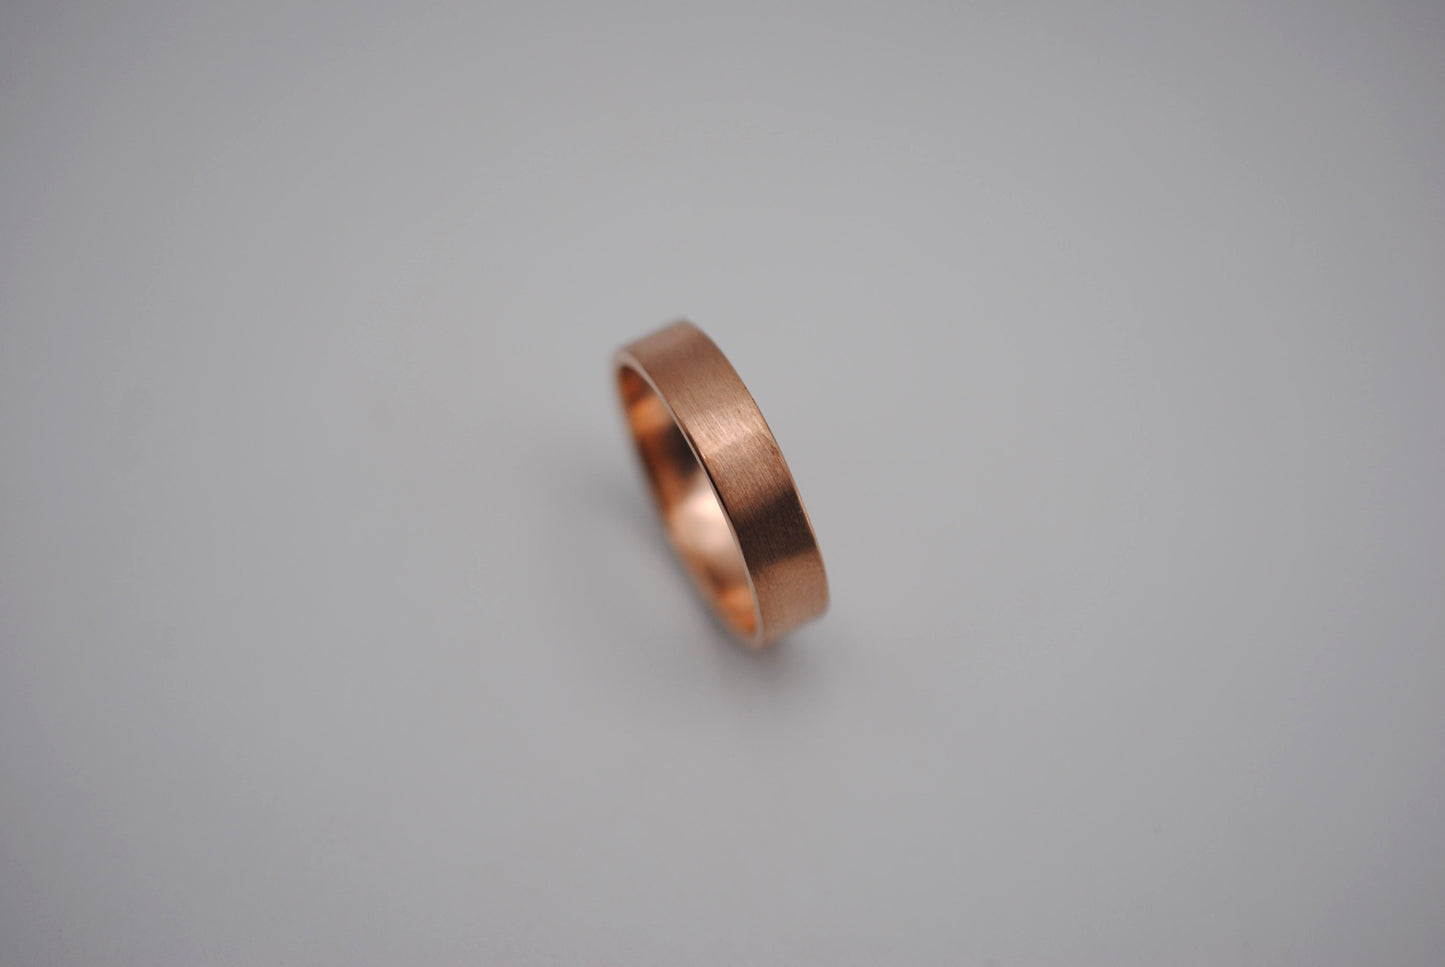 Ring Band: Brushed Texture, Rose Gold Finish, 5mm wide